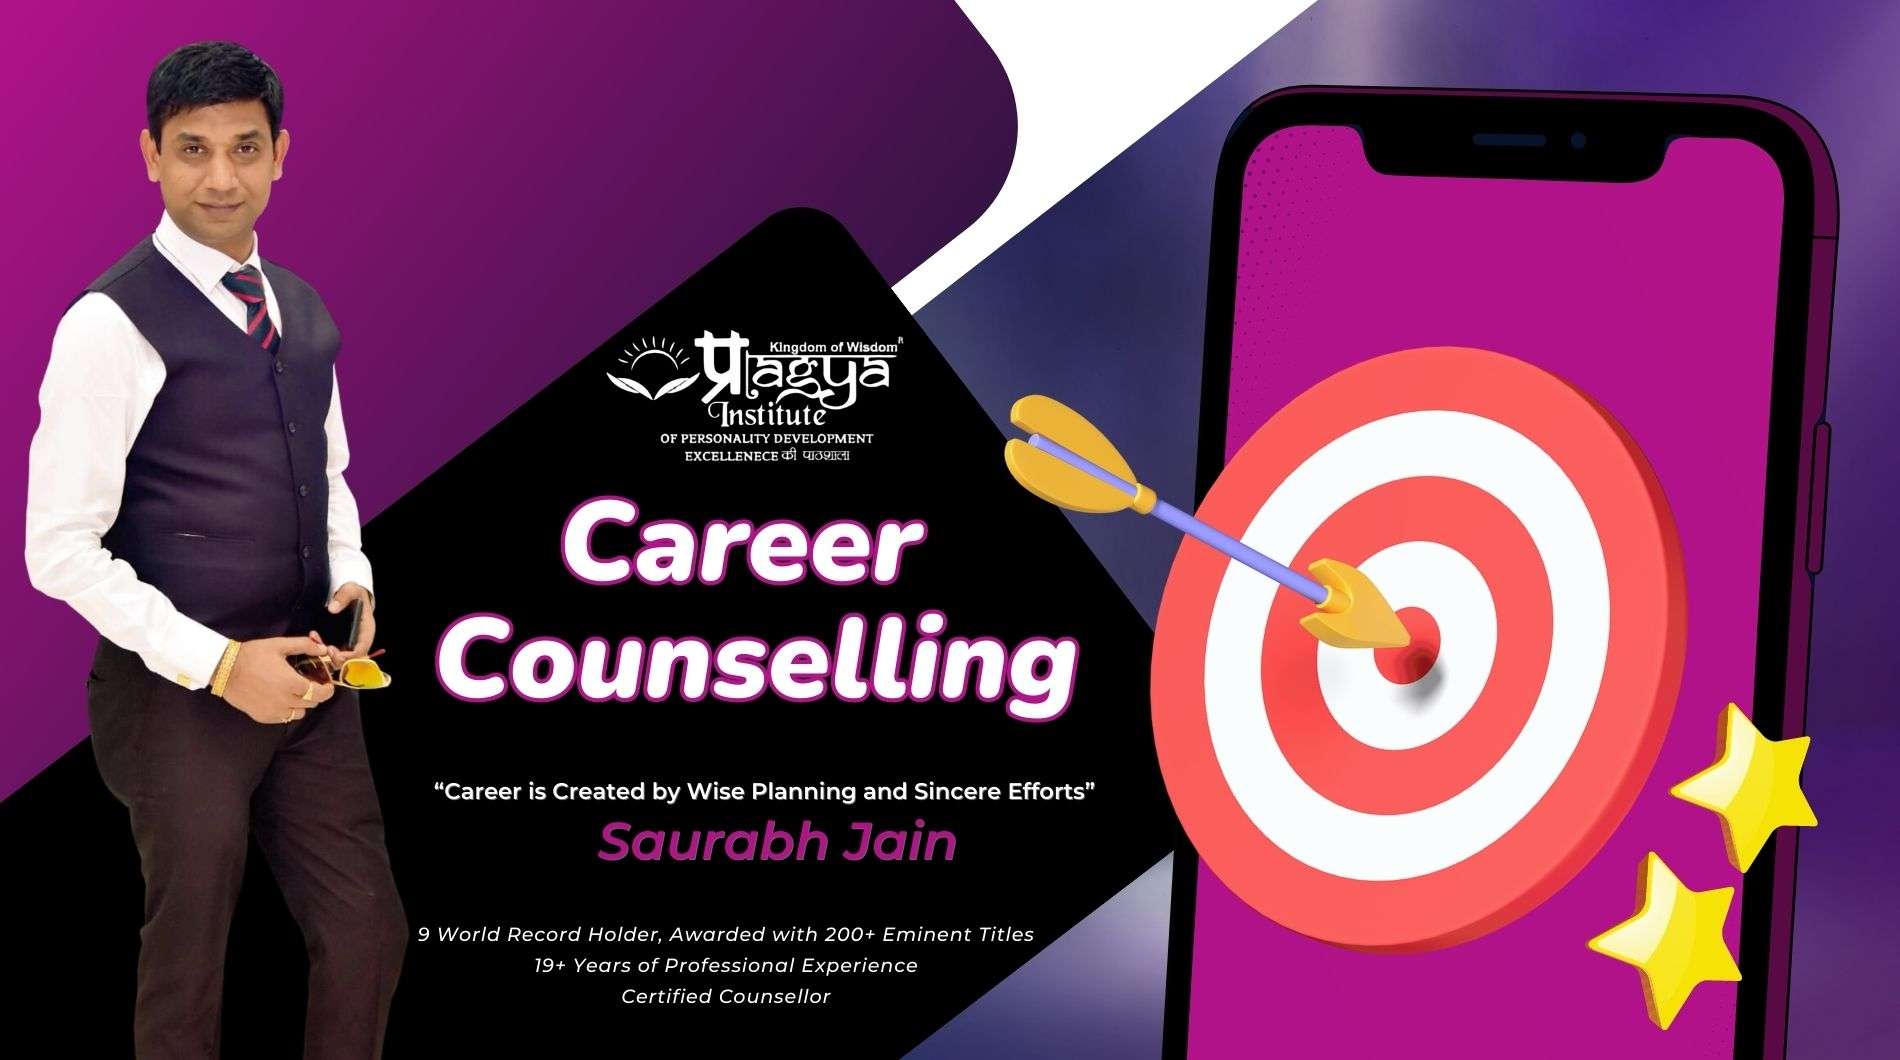 Career Counselling 